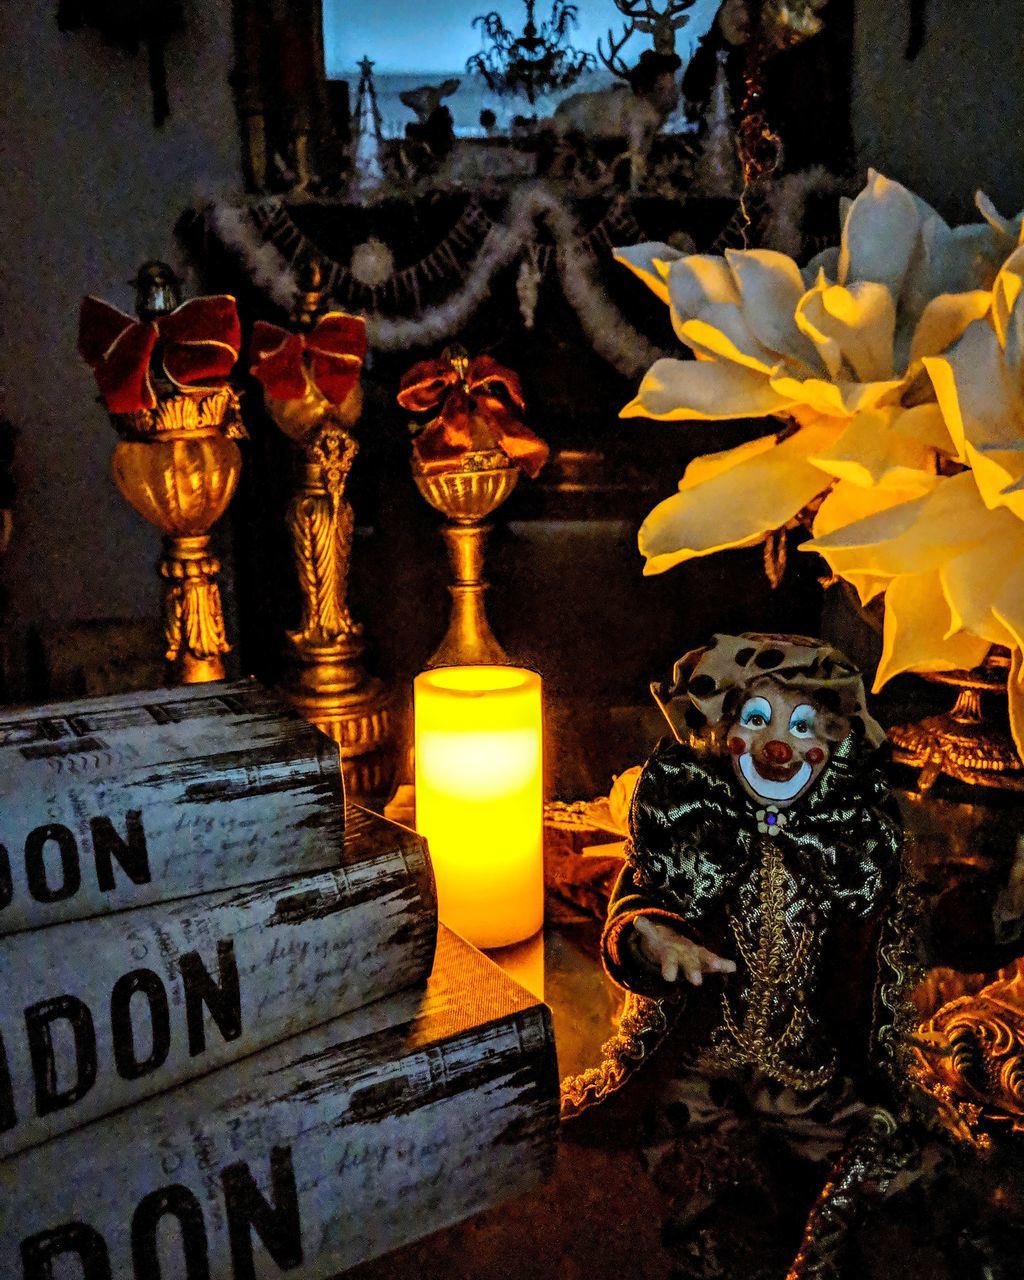 CLOSE-UP OF STATUE OF ILLUMINATED CANDLES